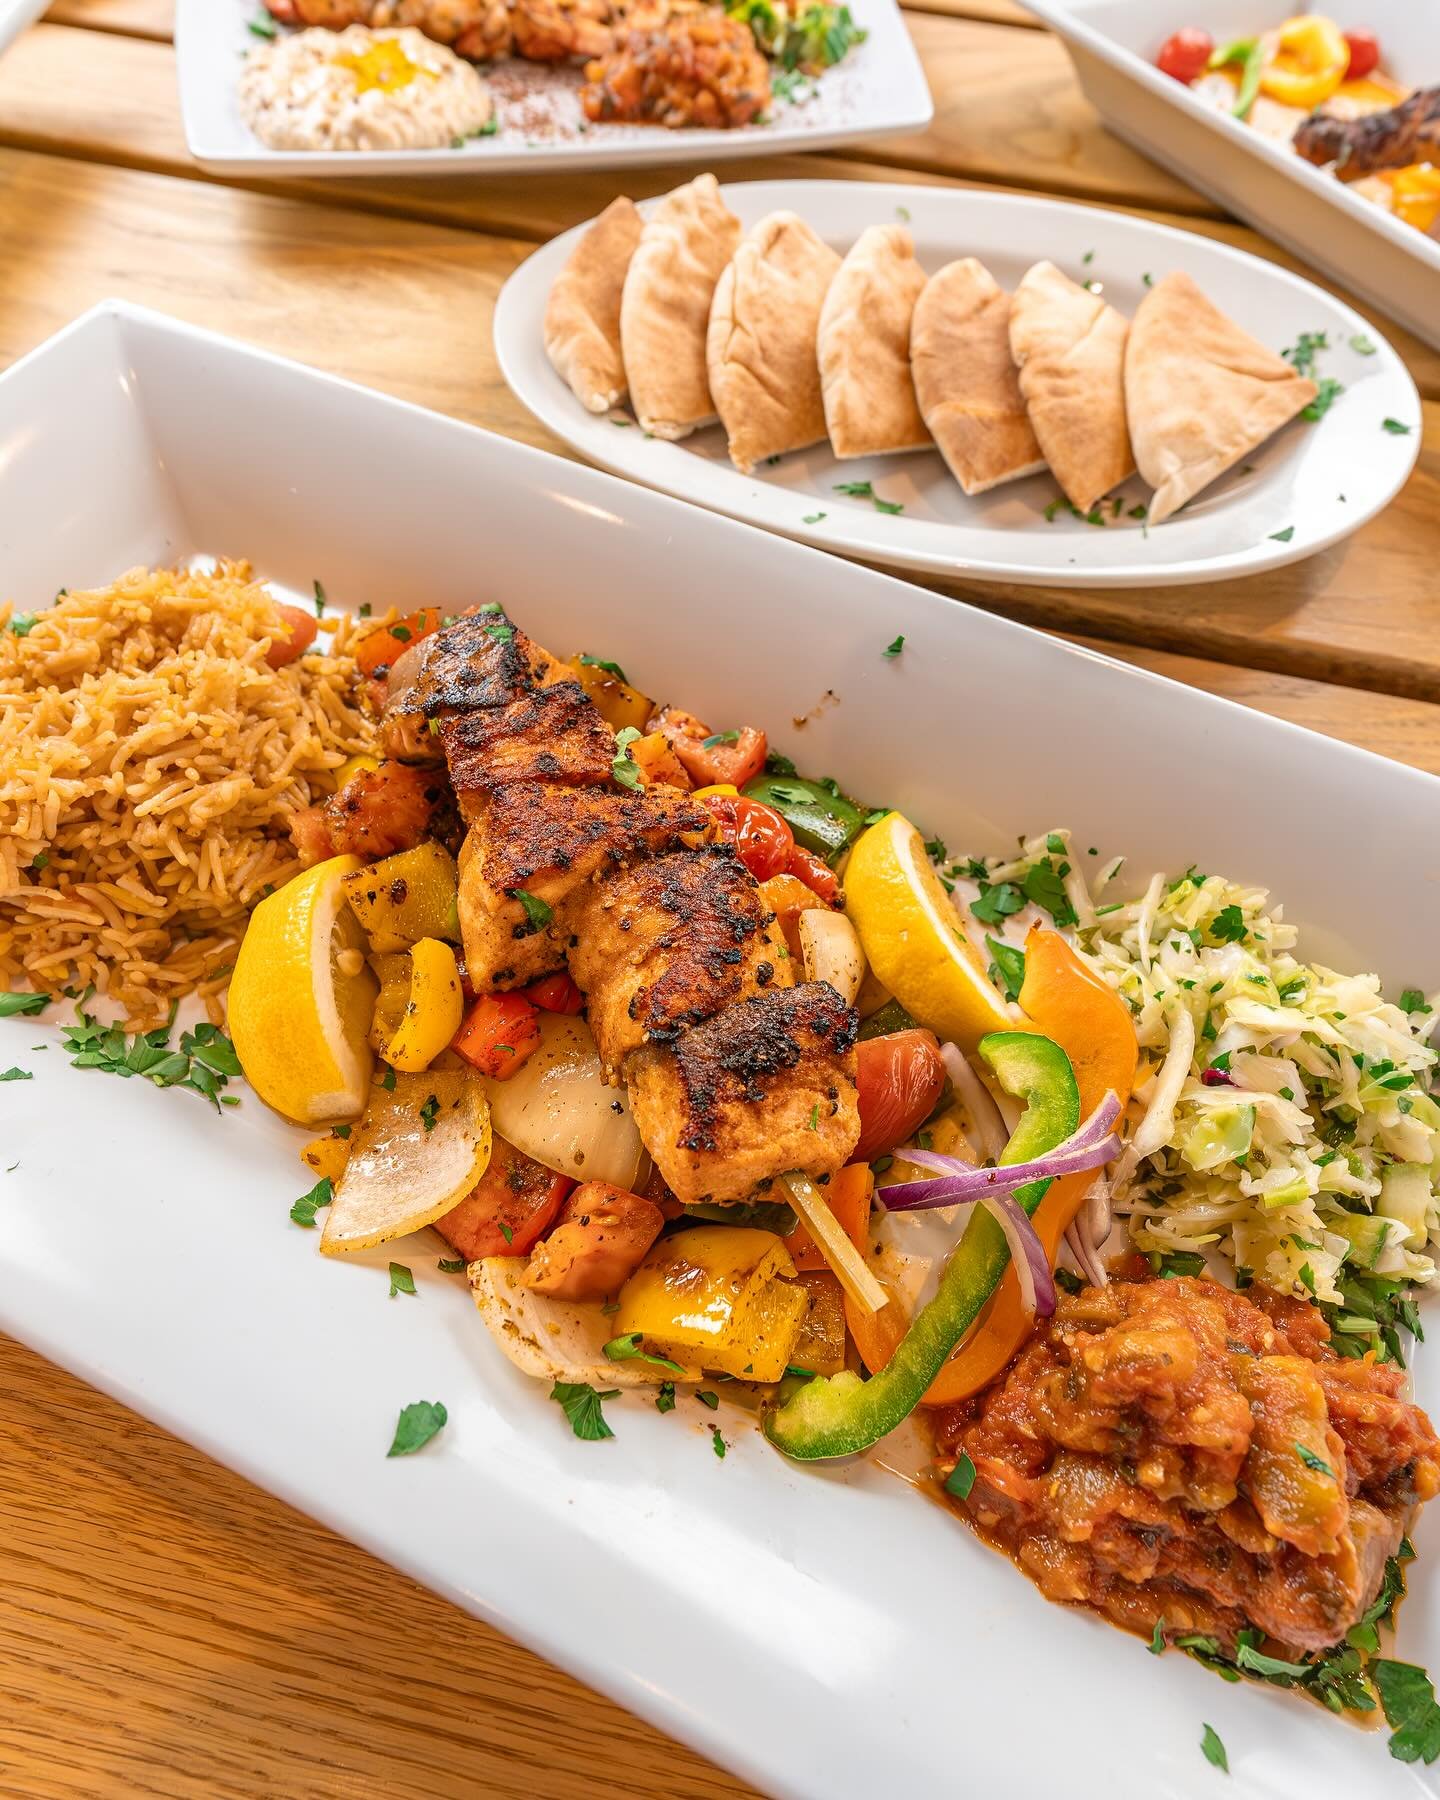 Aviva brings the heart of the Mediterranean to Atlanta with our diverse catering options. Enjoy organic salads, customizable plates with your choice of two sides, and wraps rolled in our signature homemade pita. In addition to our individually packag